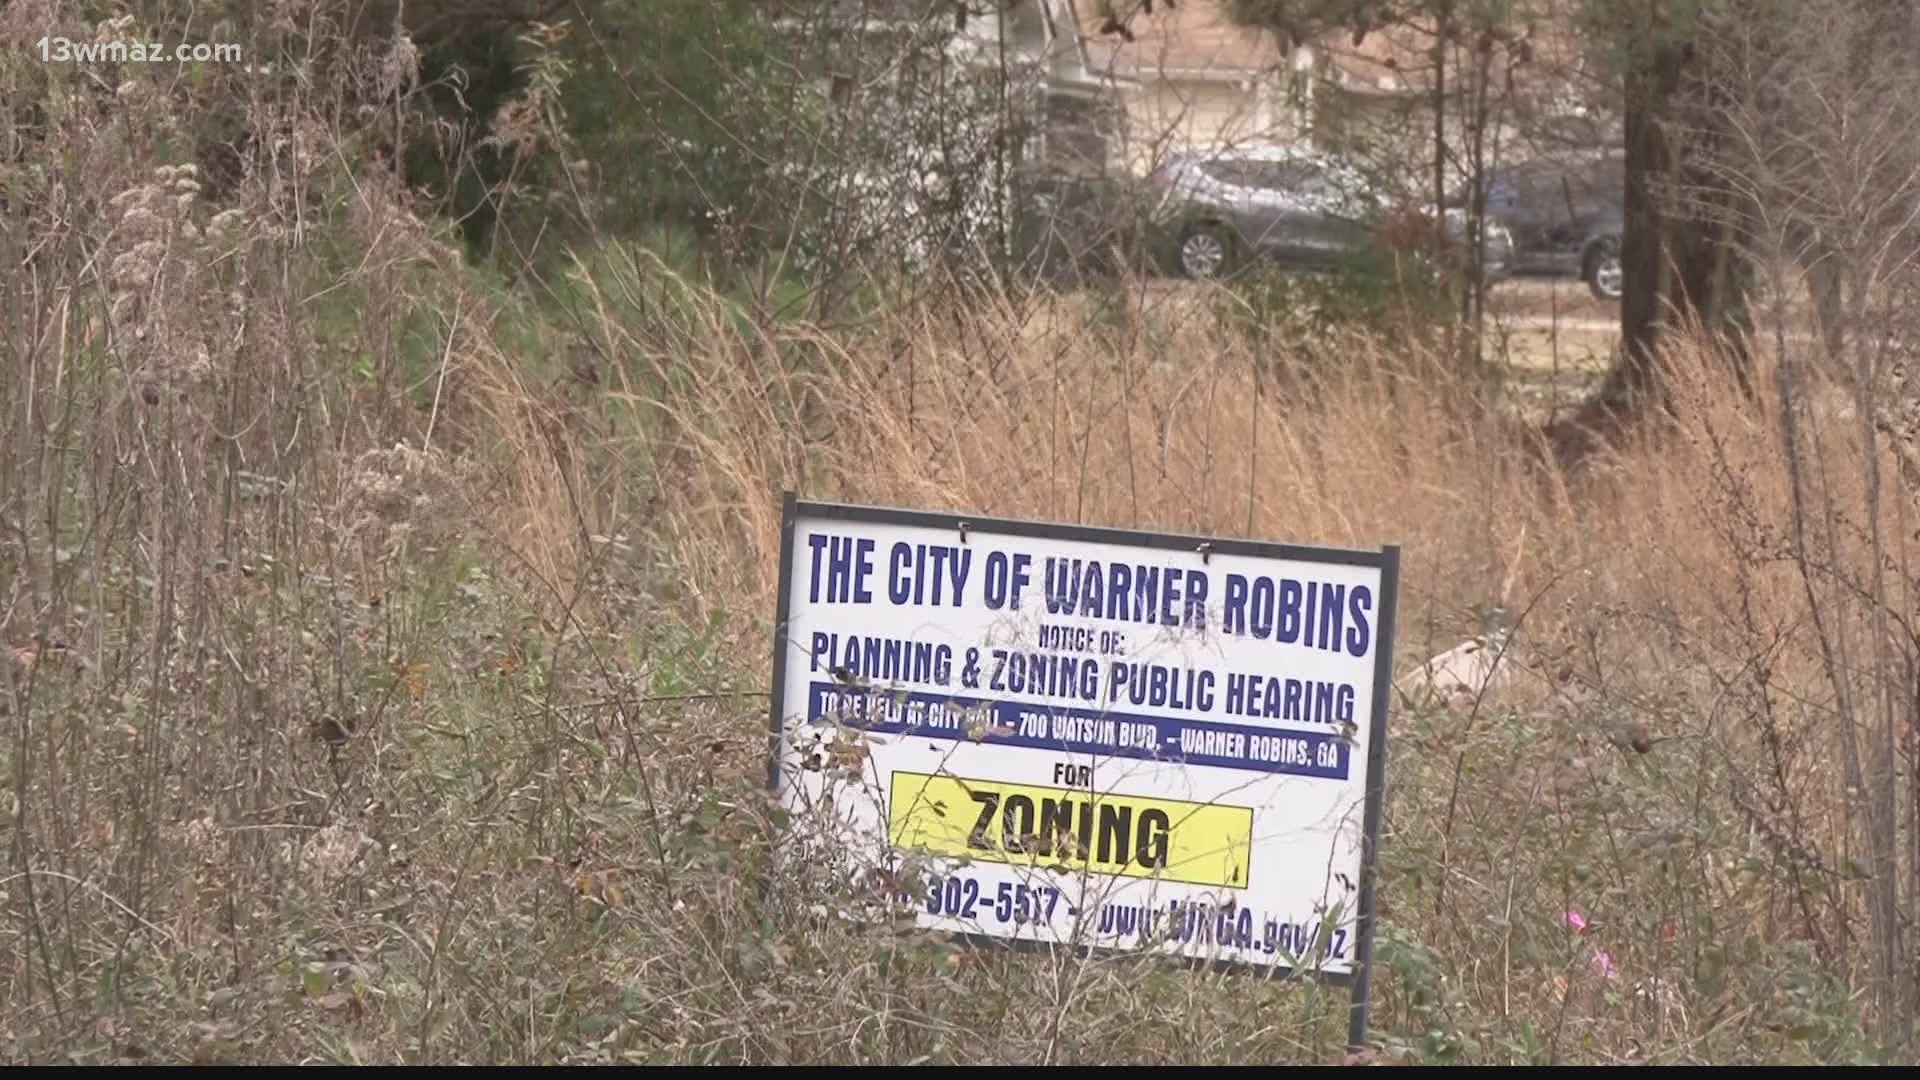 Tuesday, a Warner Robins board will discuss whether to rezone part of the Northlake Subdivision to make way for a 240-apartment project.